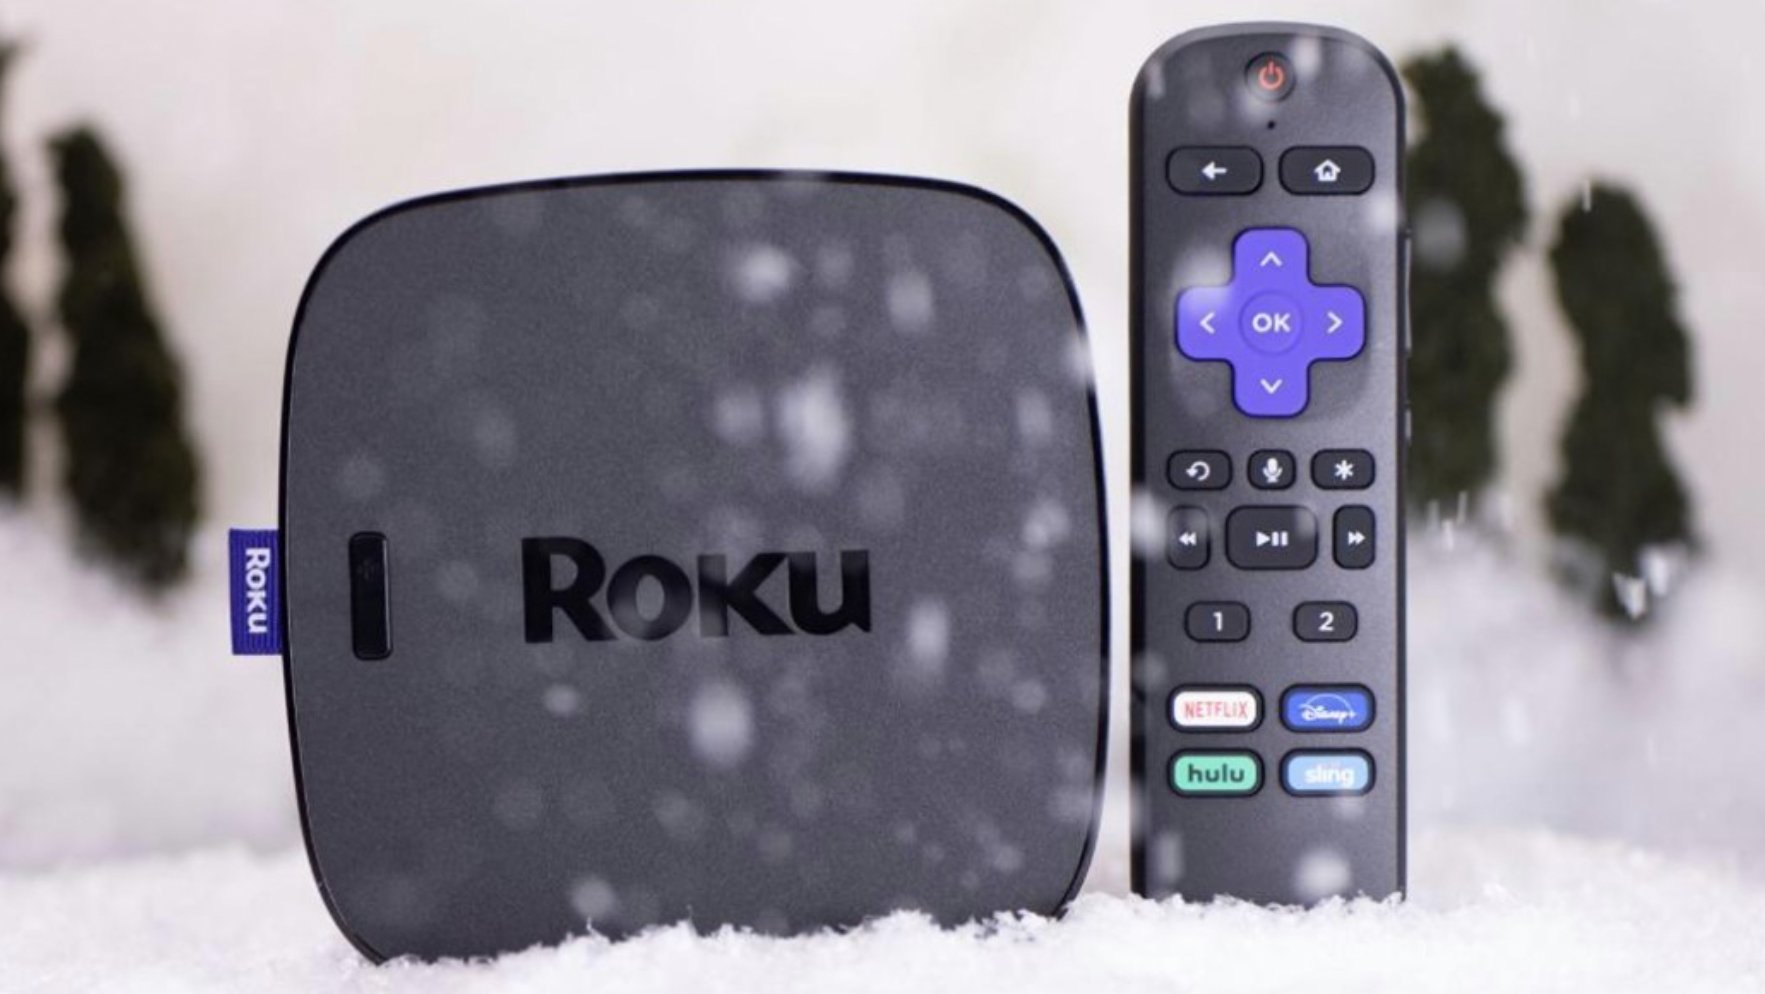 Roku Update Drama: Users Locked Out Over New Terms Sparks Big Backlash